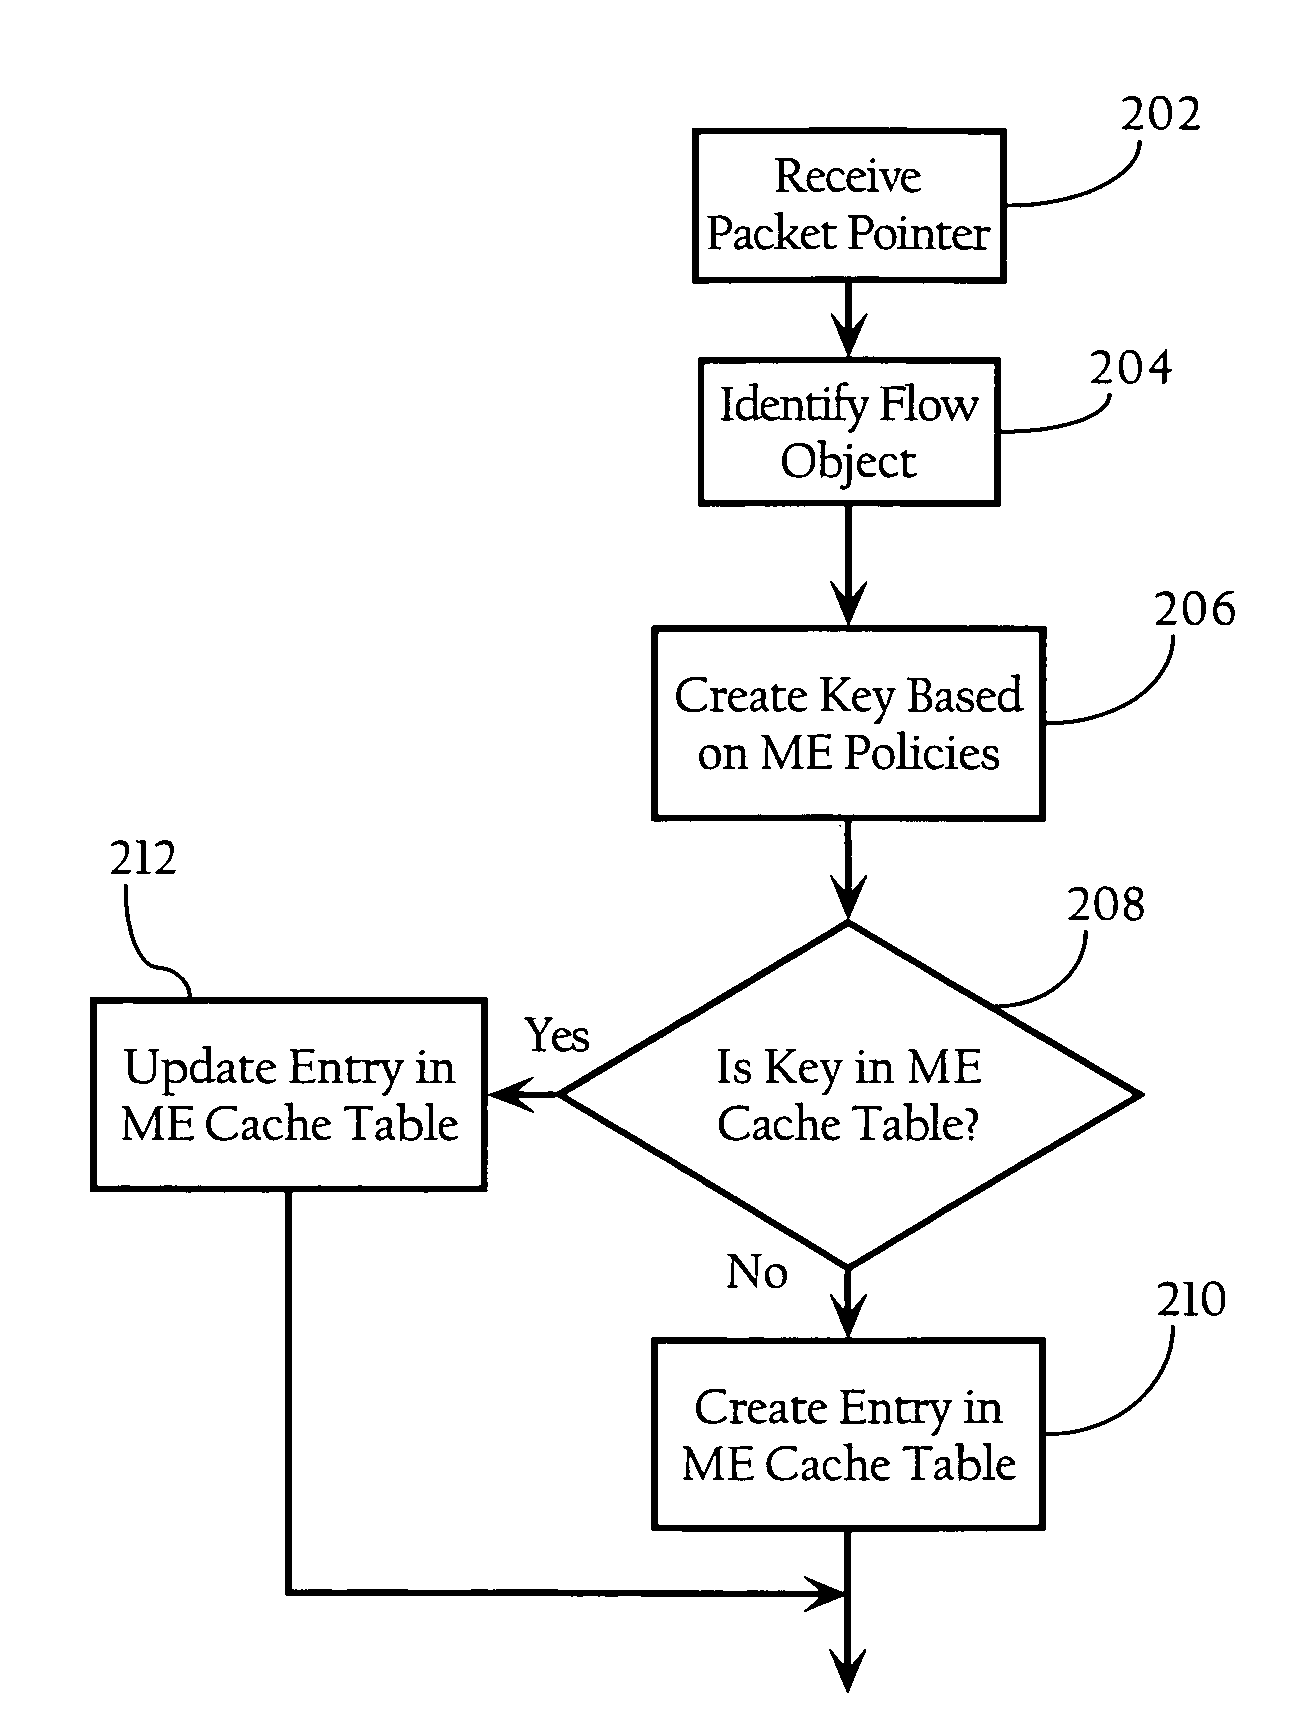 Adaptive, flow-based network traffic measurement and monitoring system